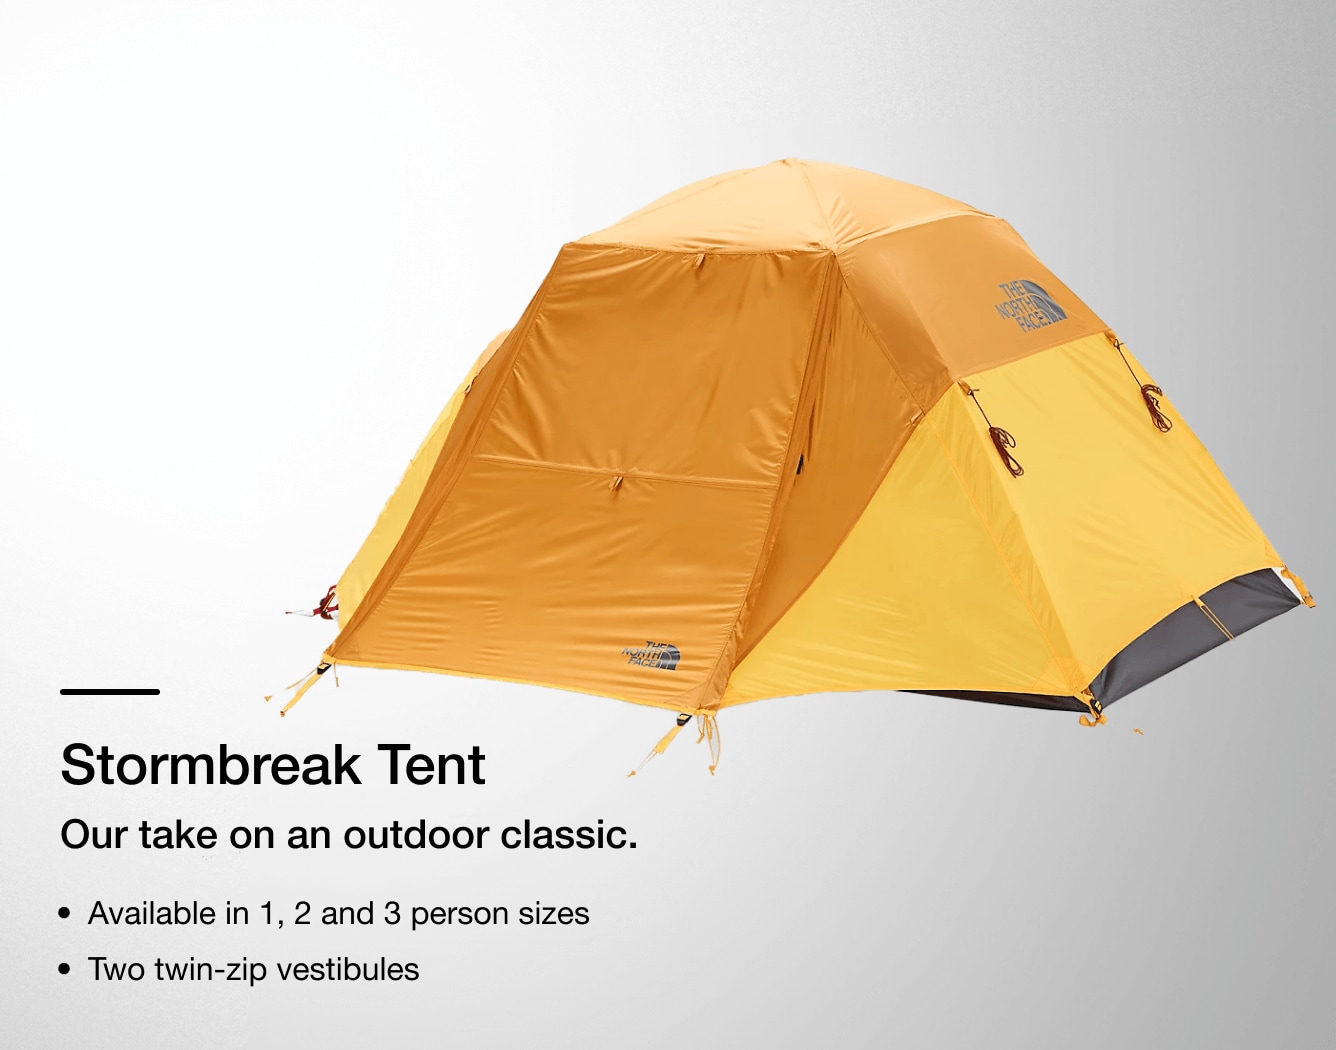 Image detailing features of the Stormbreak tent from The North Face.